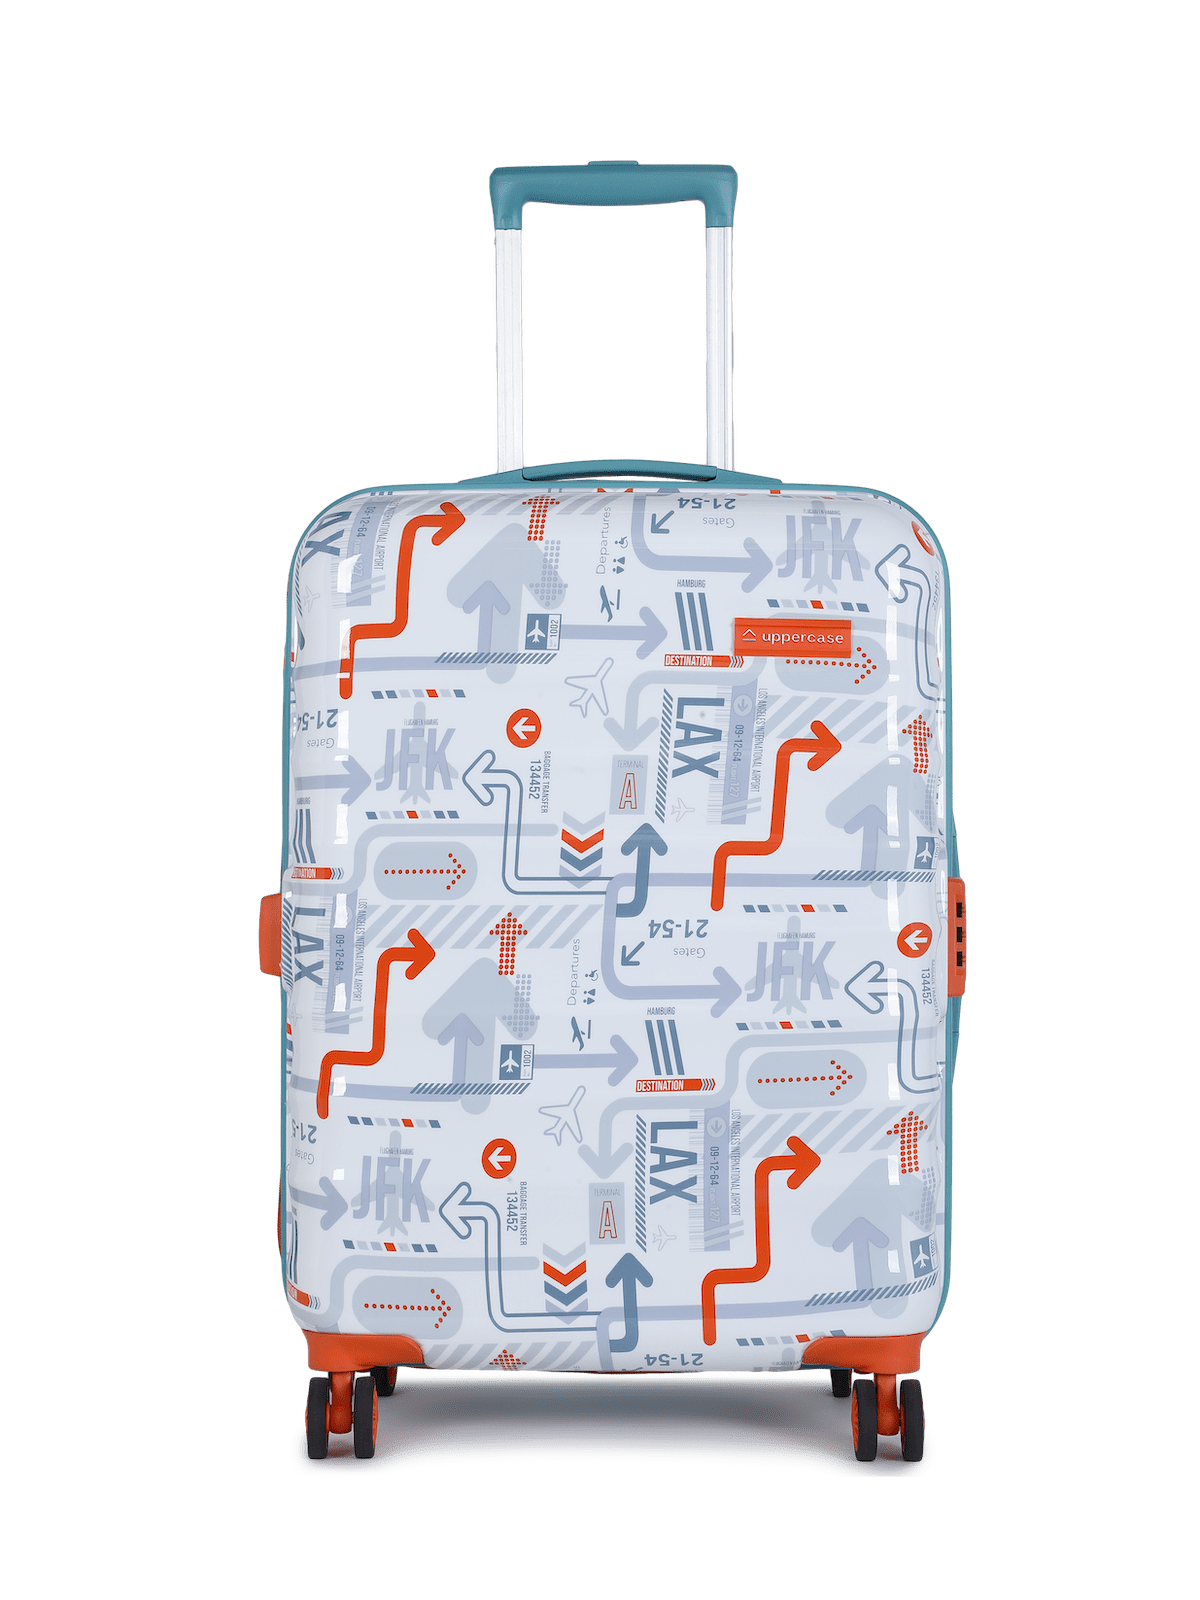 Uppercase JFK Duo Hard Luggage Trolley Bag Set of 3 (S+M+L) Teal